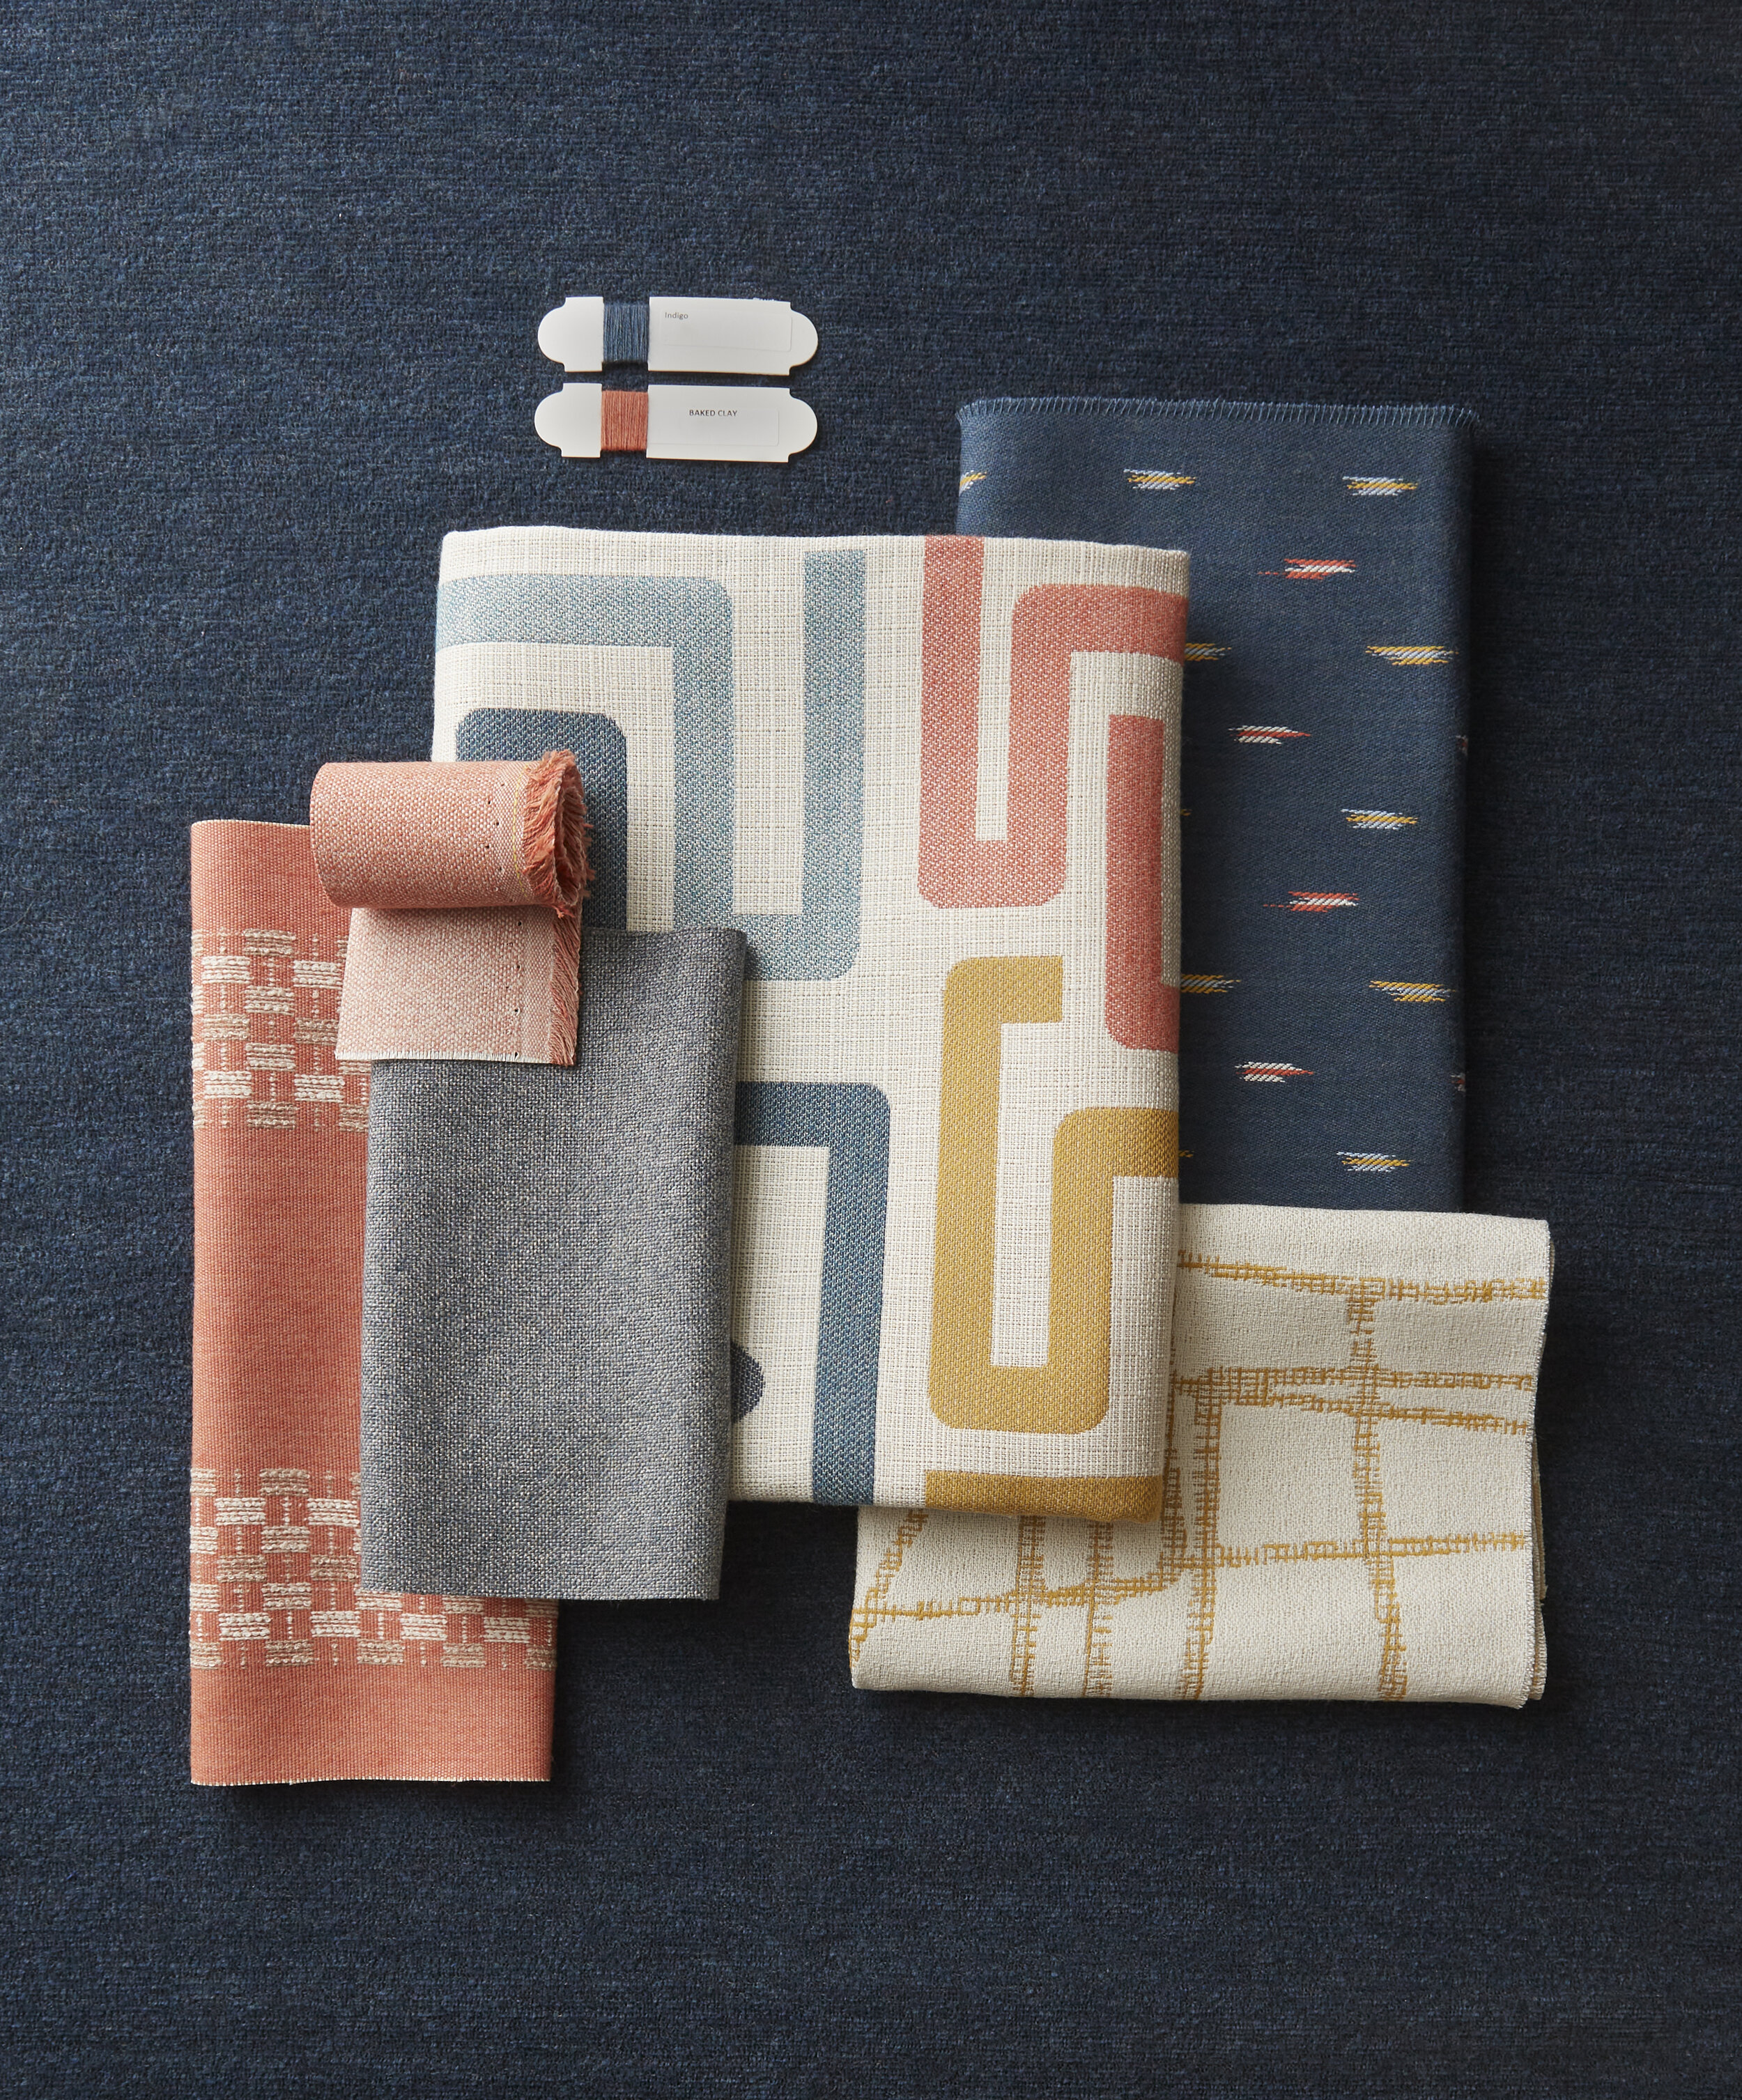 Sunbrella’s new collection offers a mix of patterns.